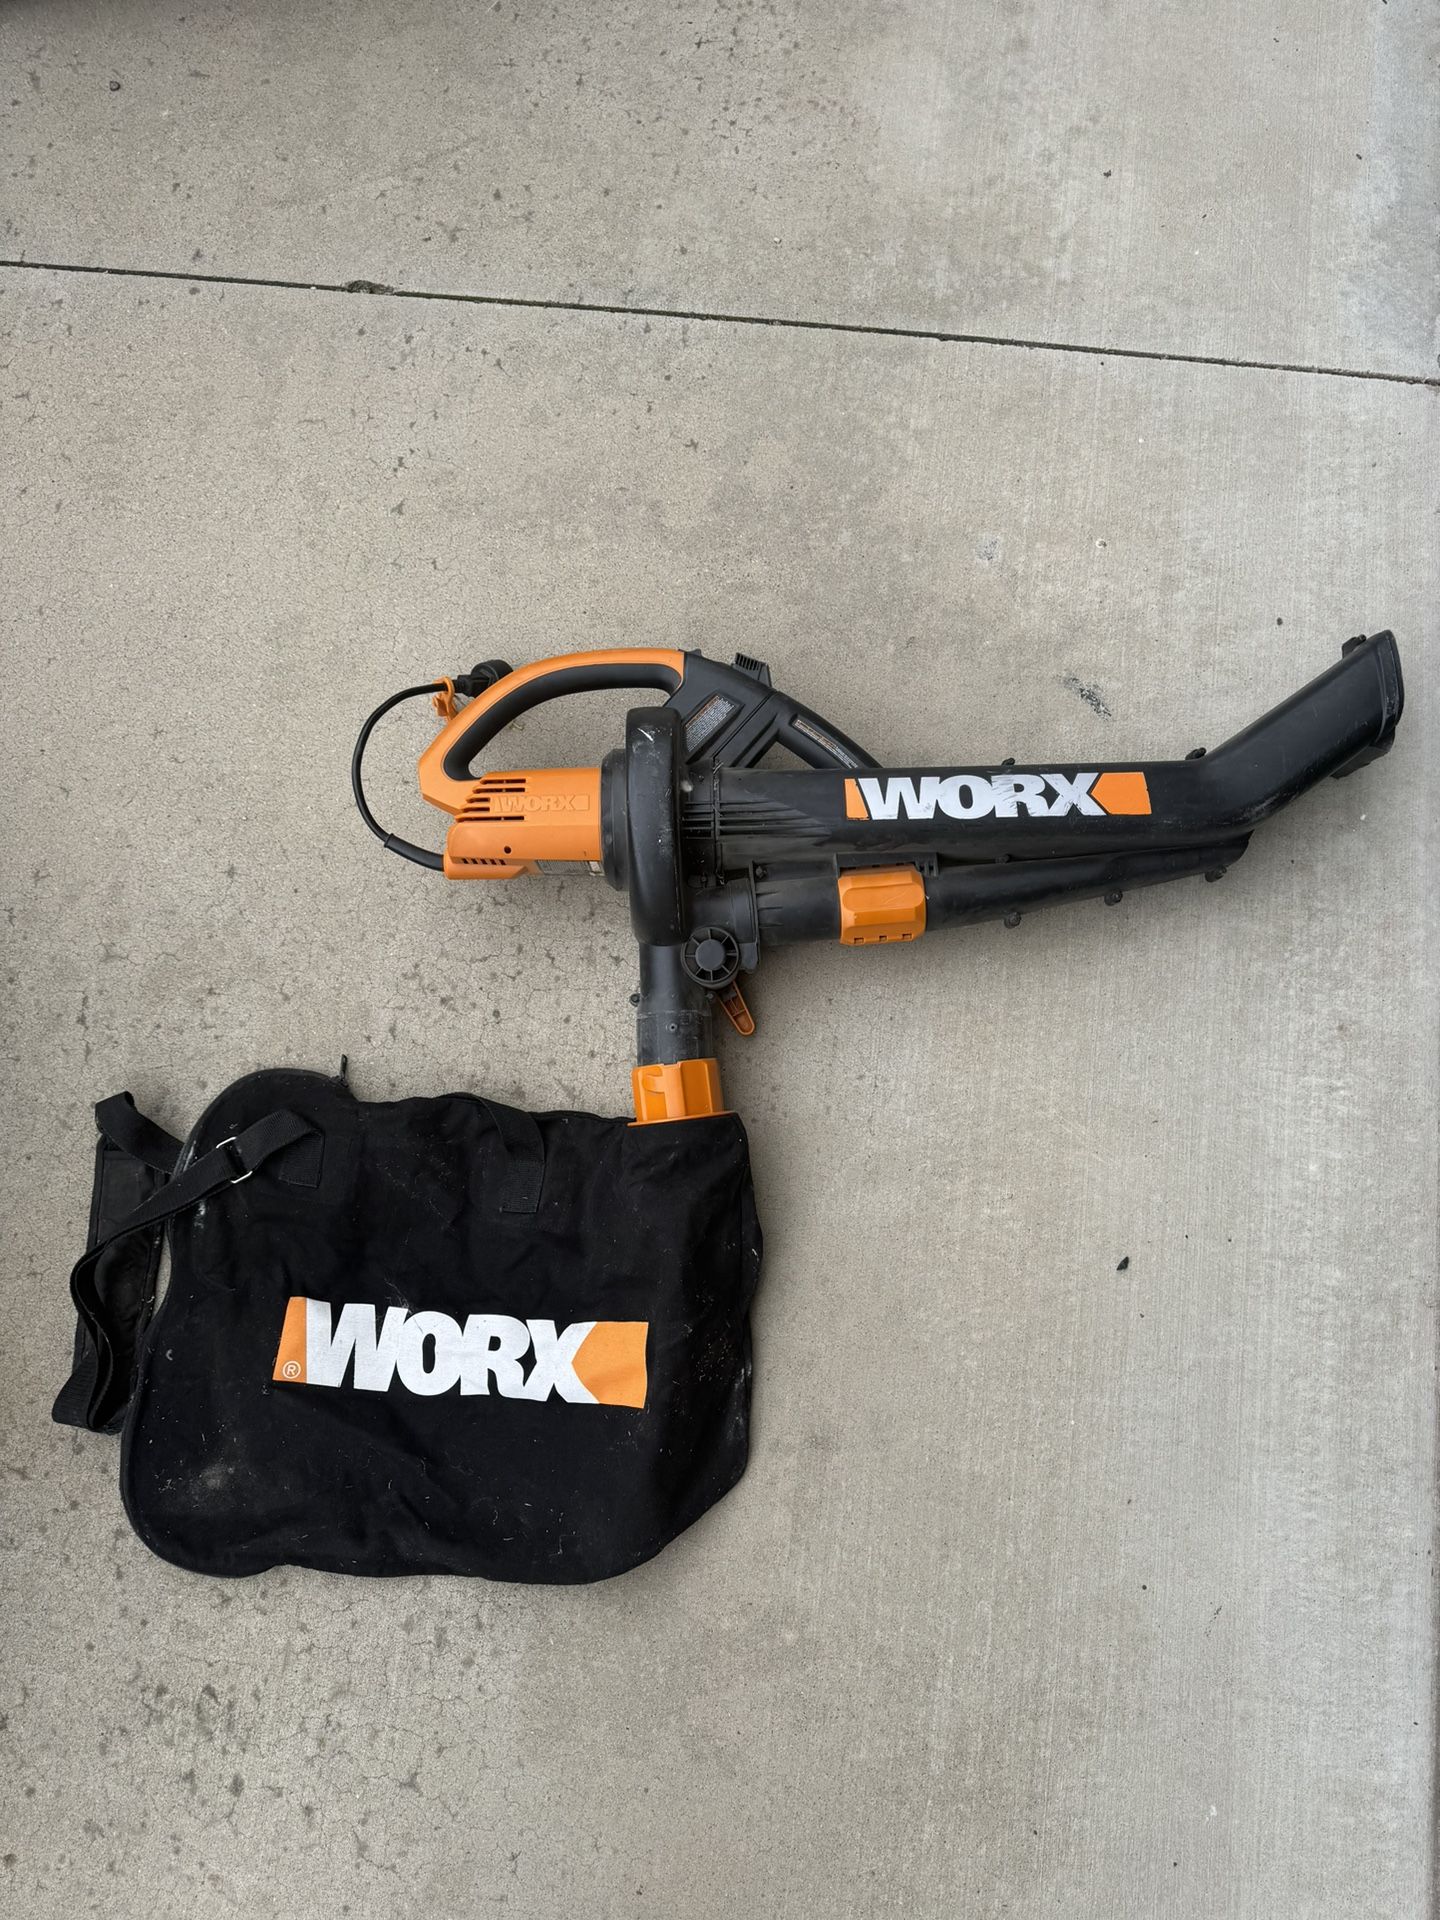 Worx Corded Electric Handheld Leaf Blower/Mulcher/Vacume with collection bag